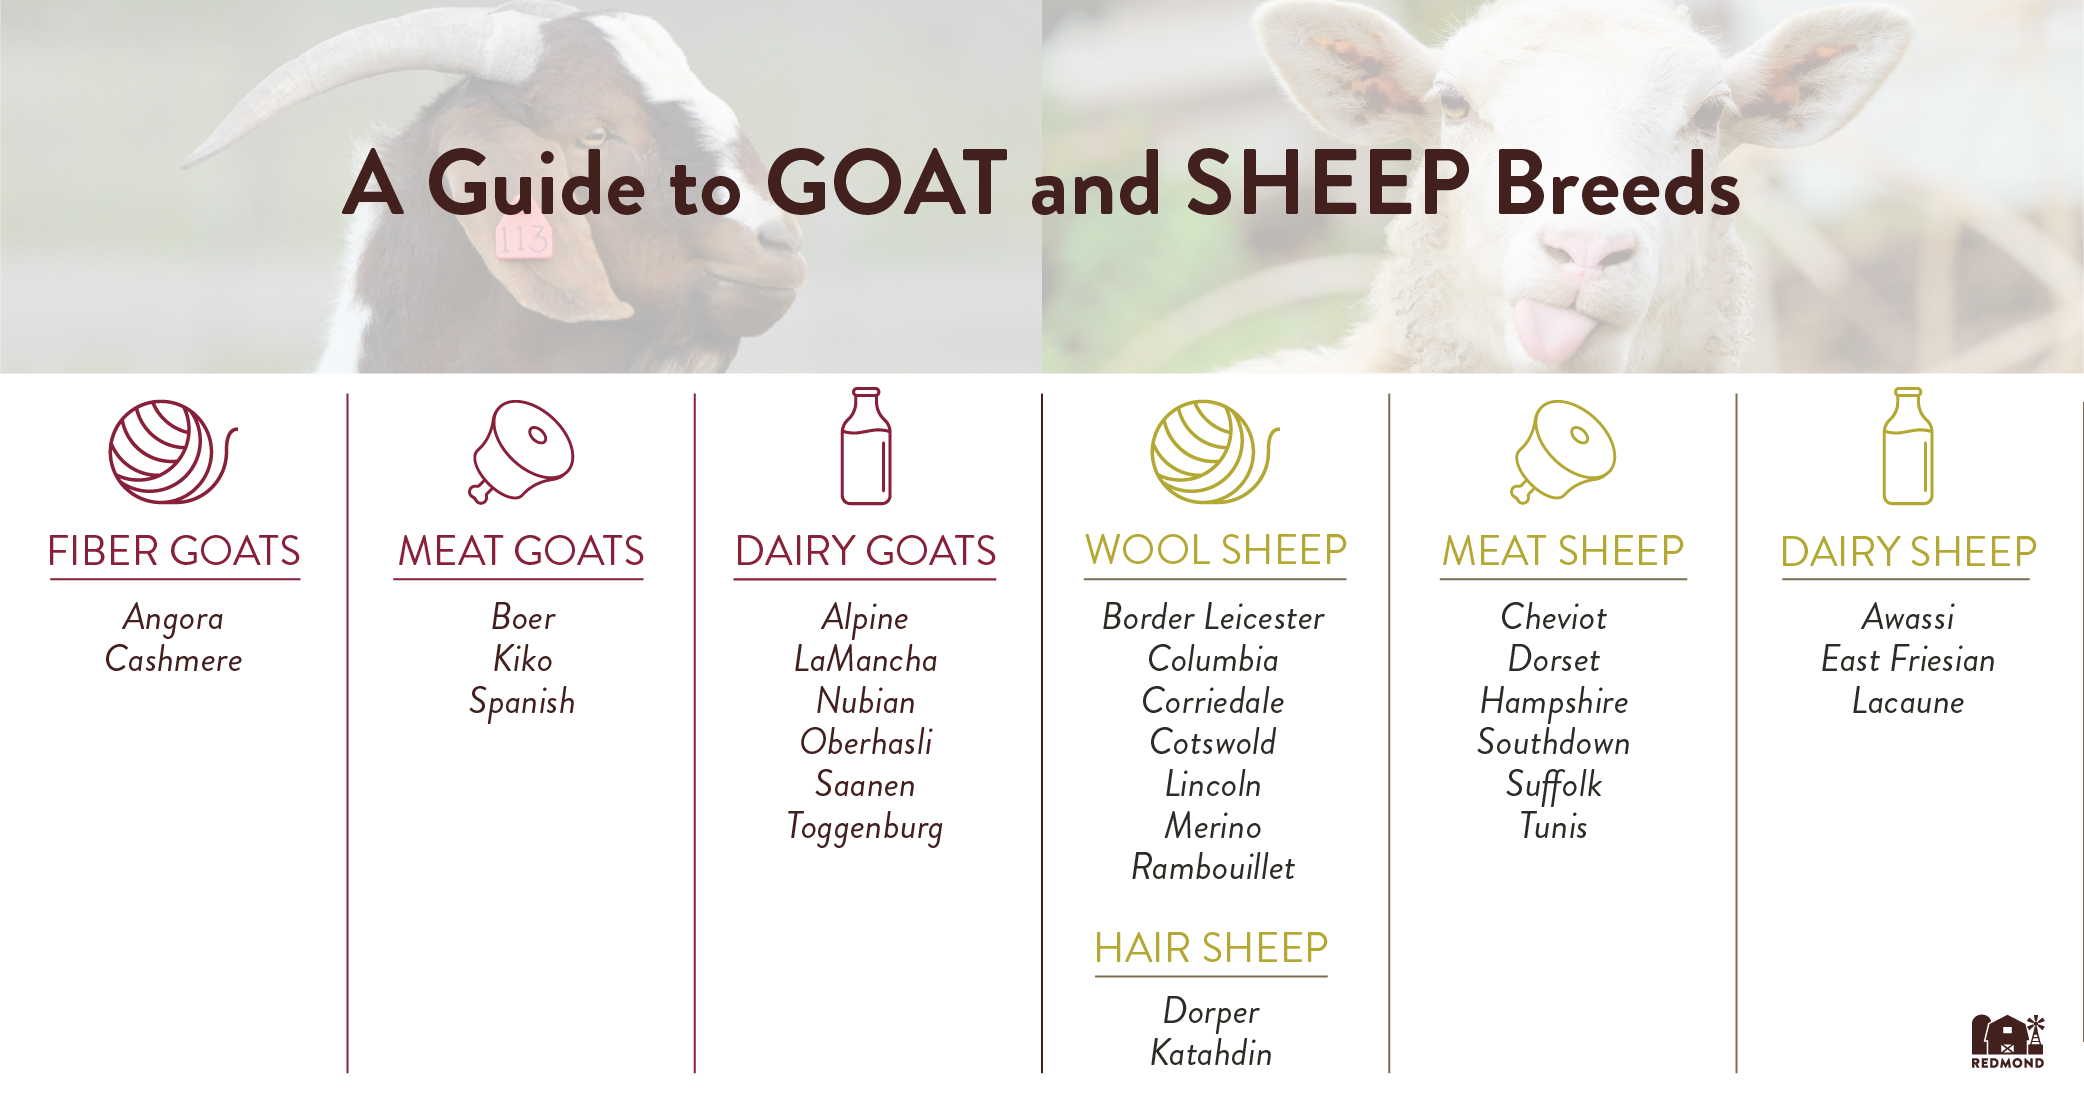 Goat and sheep breeds for milk, fiber, and dairy